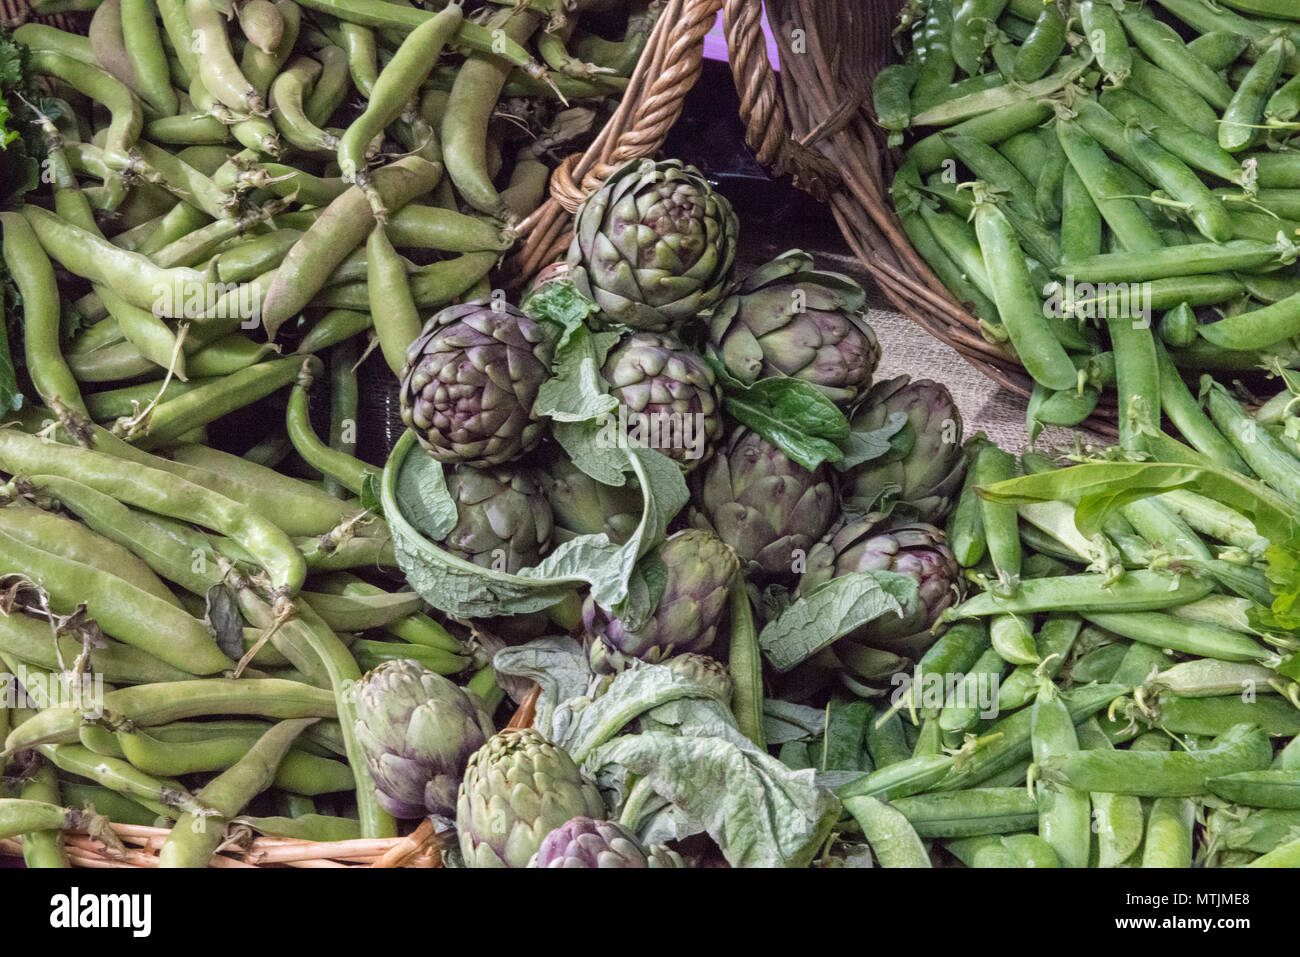 fresh artichokes and green pea pods o display at borough market greengrocers stall on a market. Stock Photo